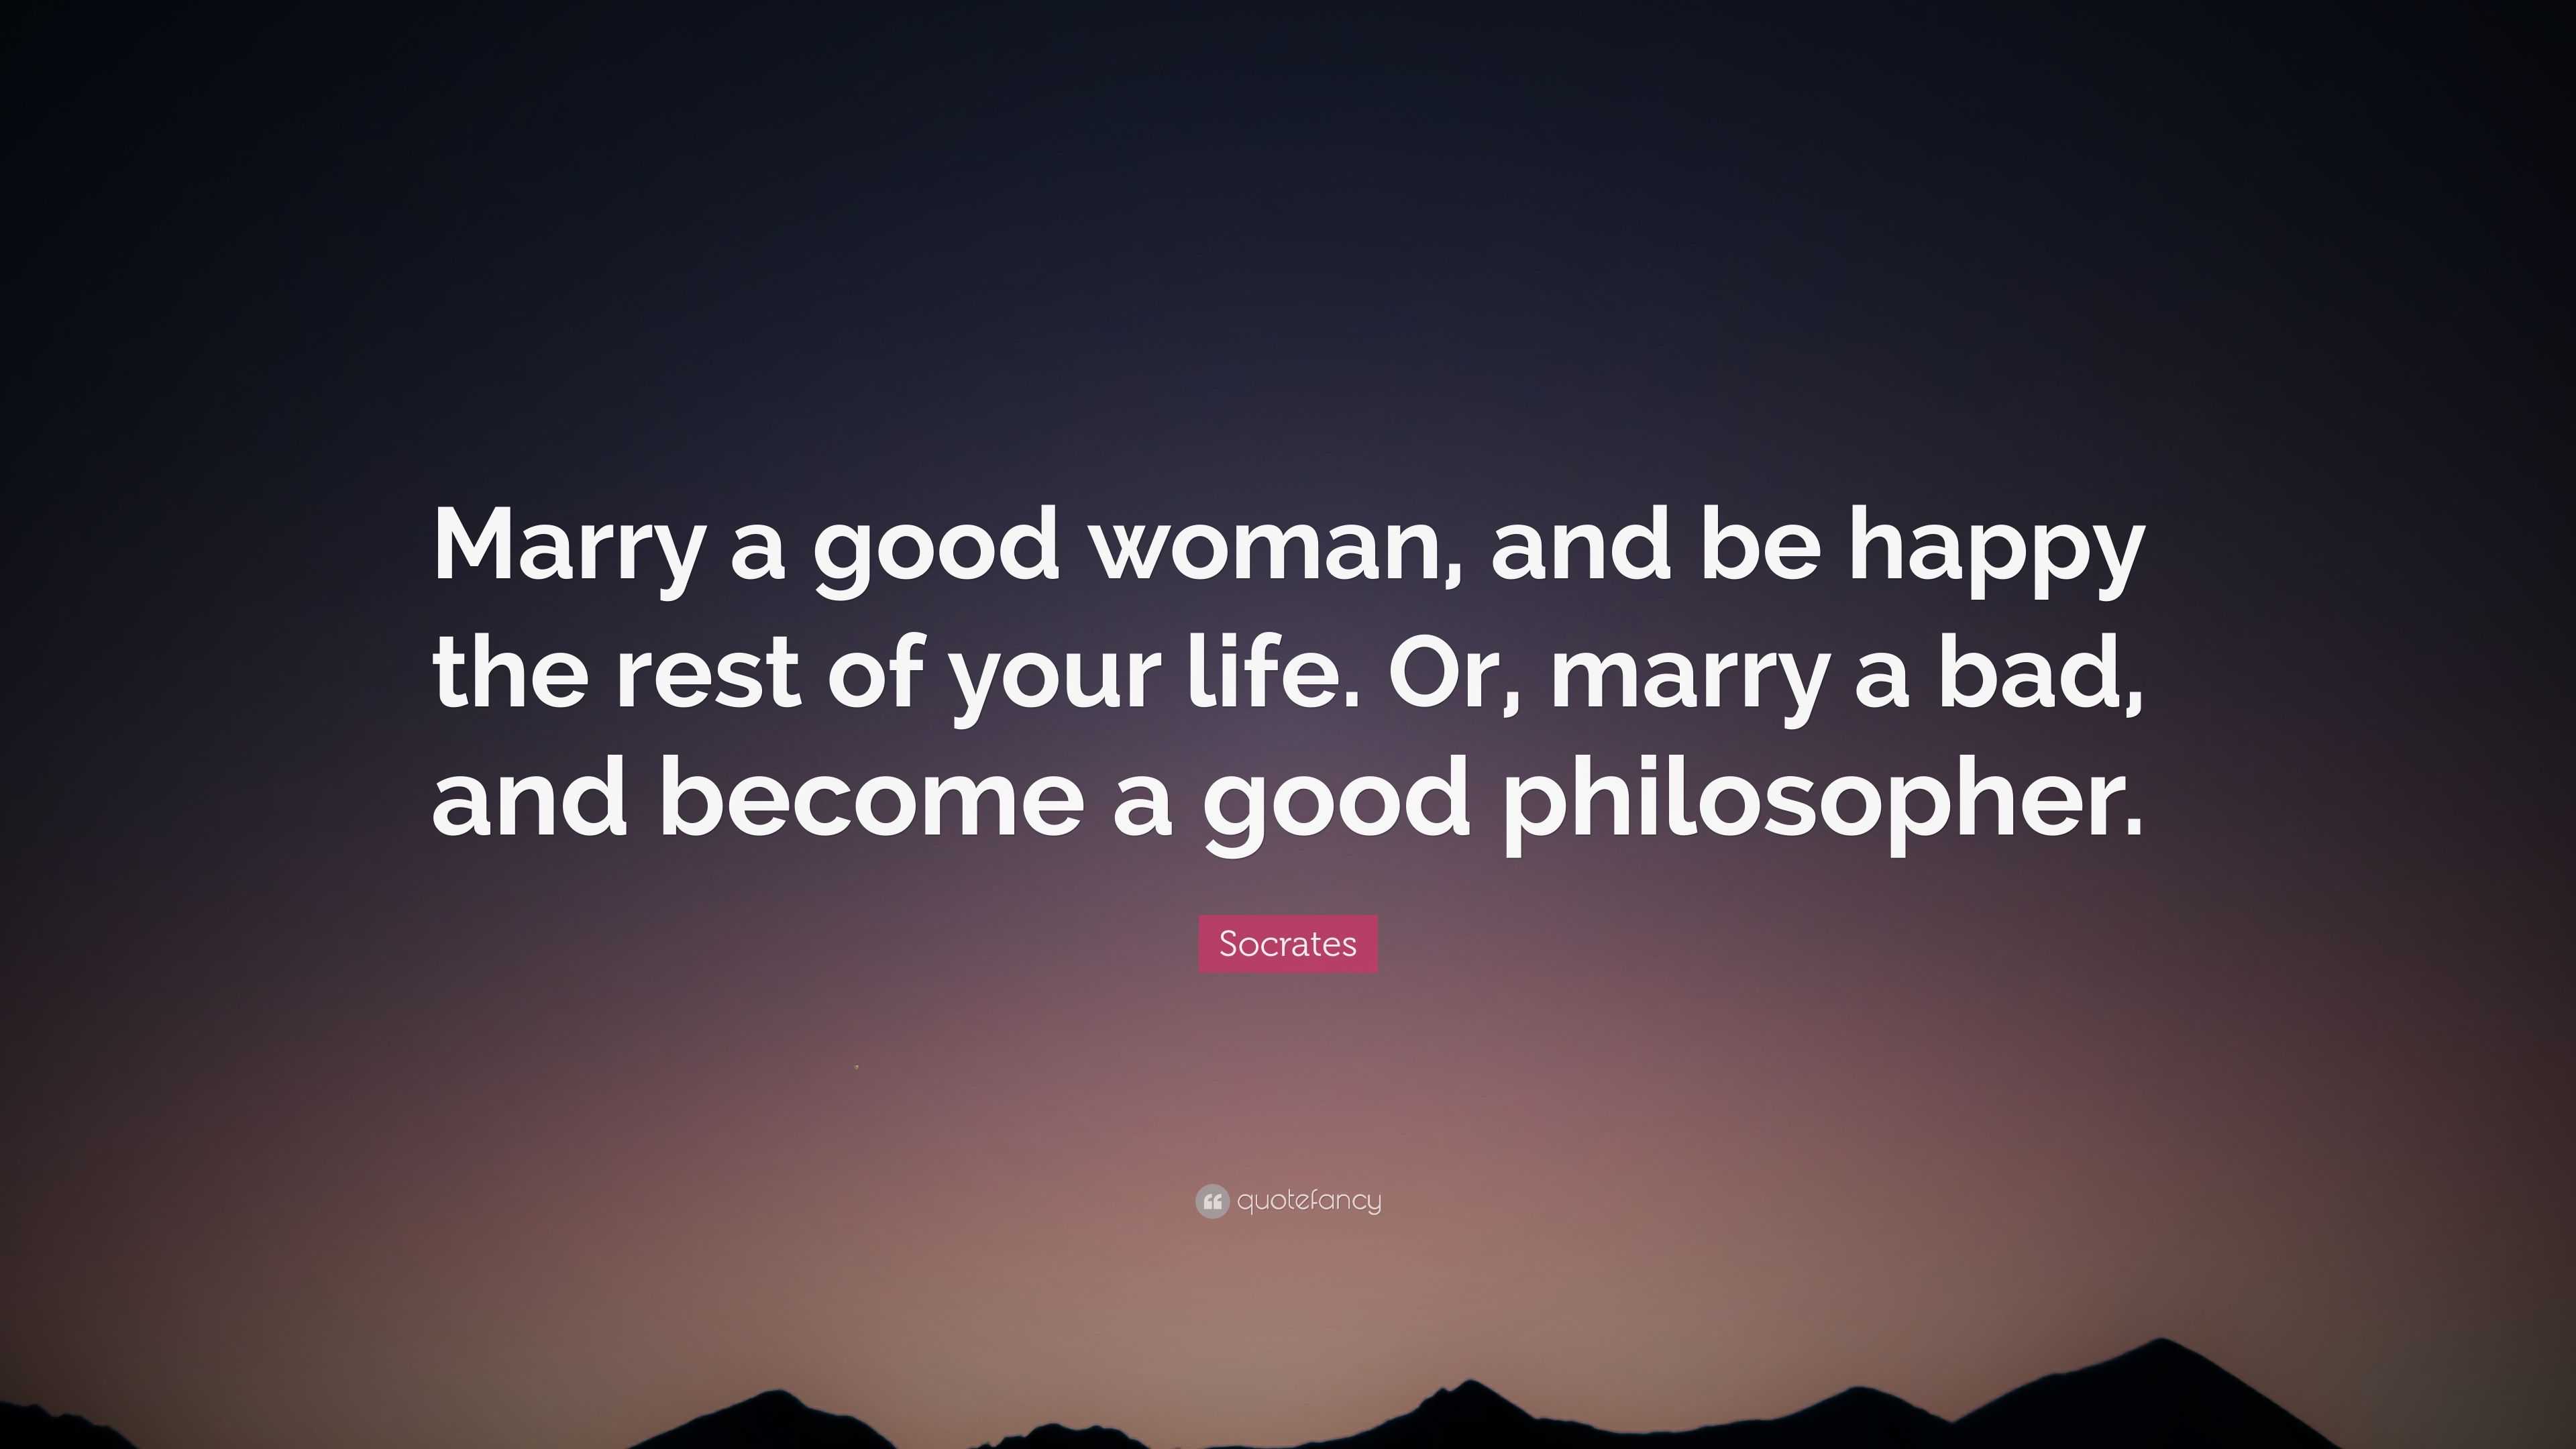 Socrates Quote “Marry a good woman and be happy the rest of your